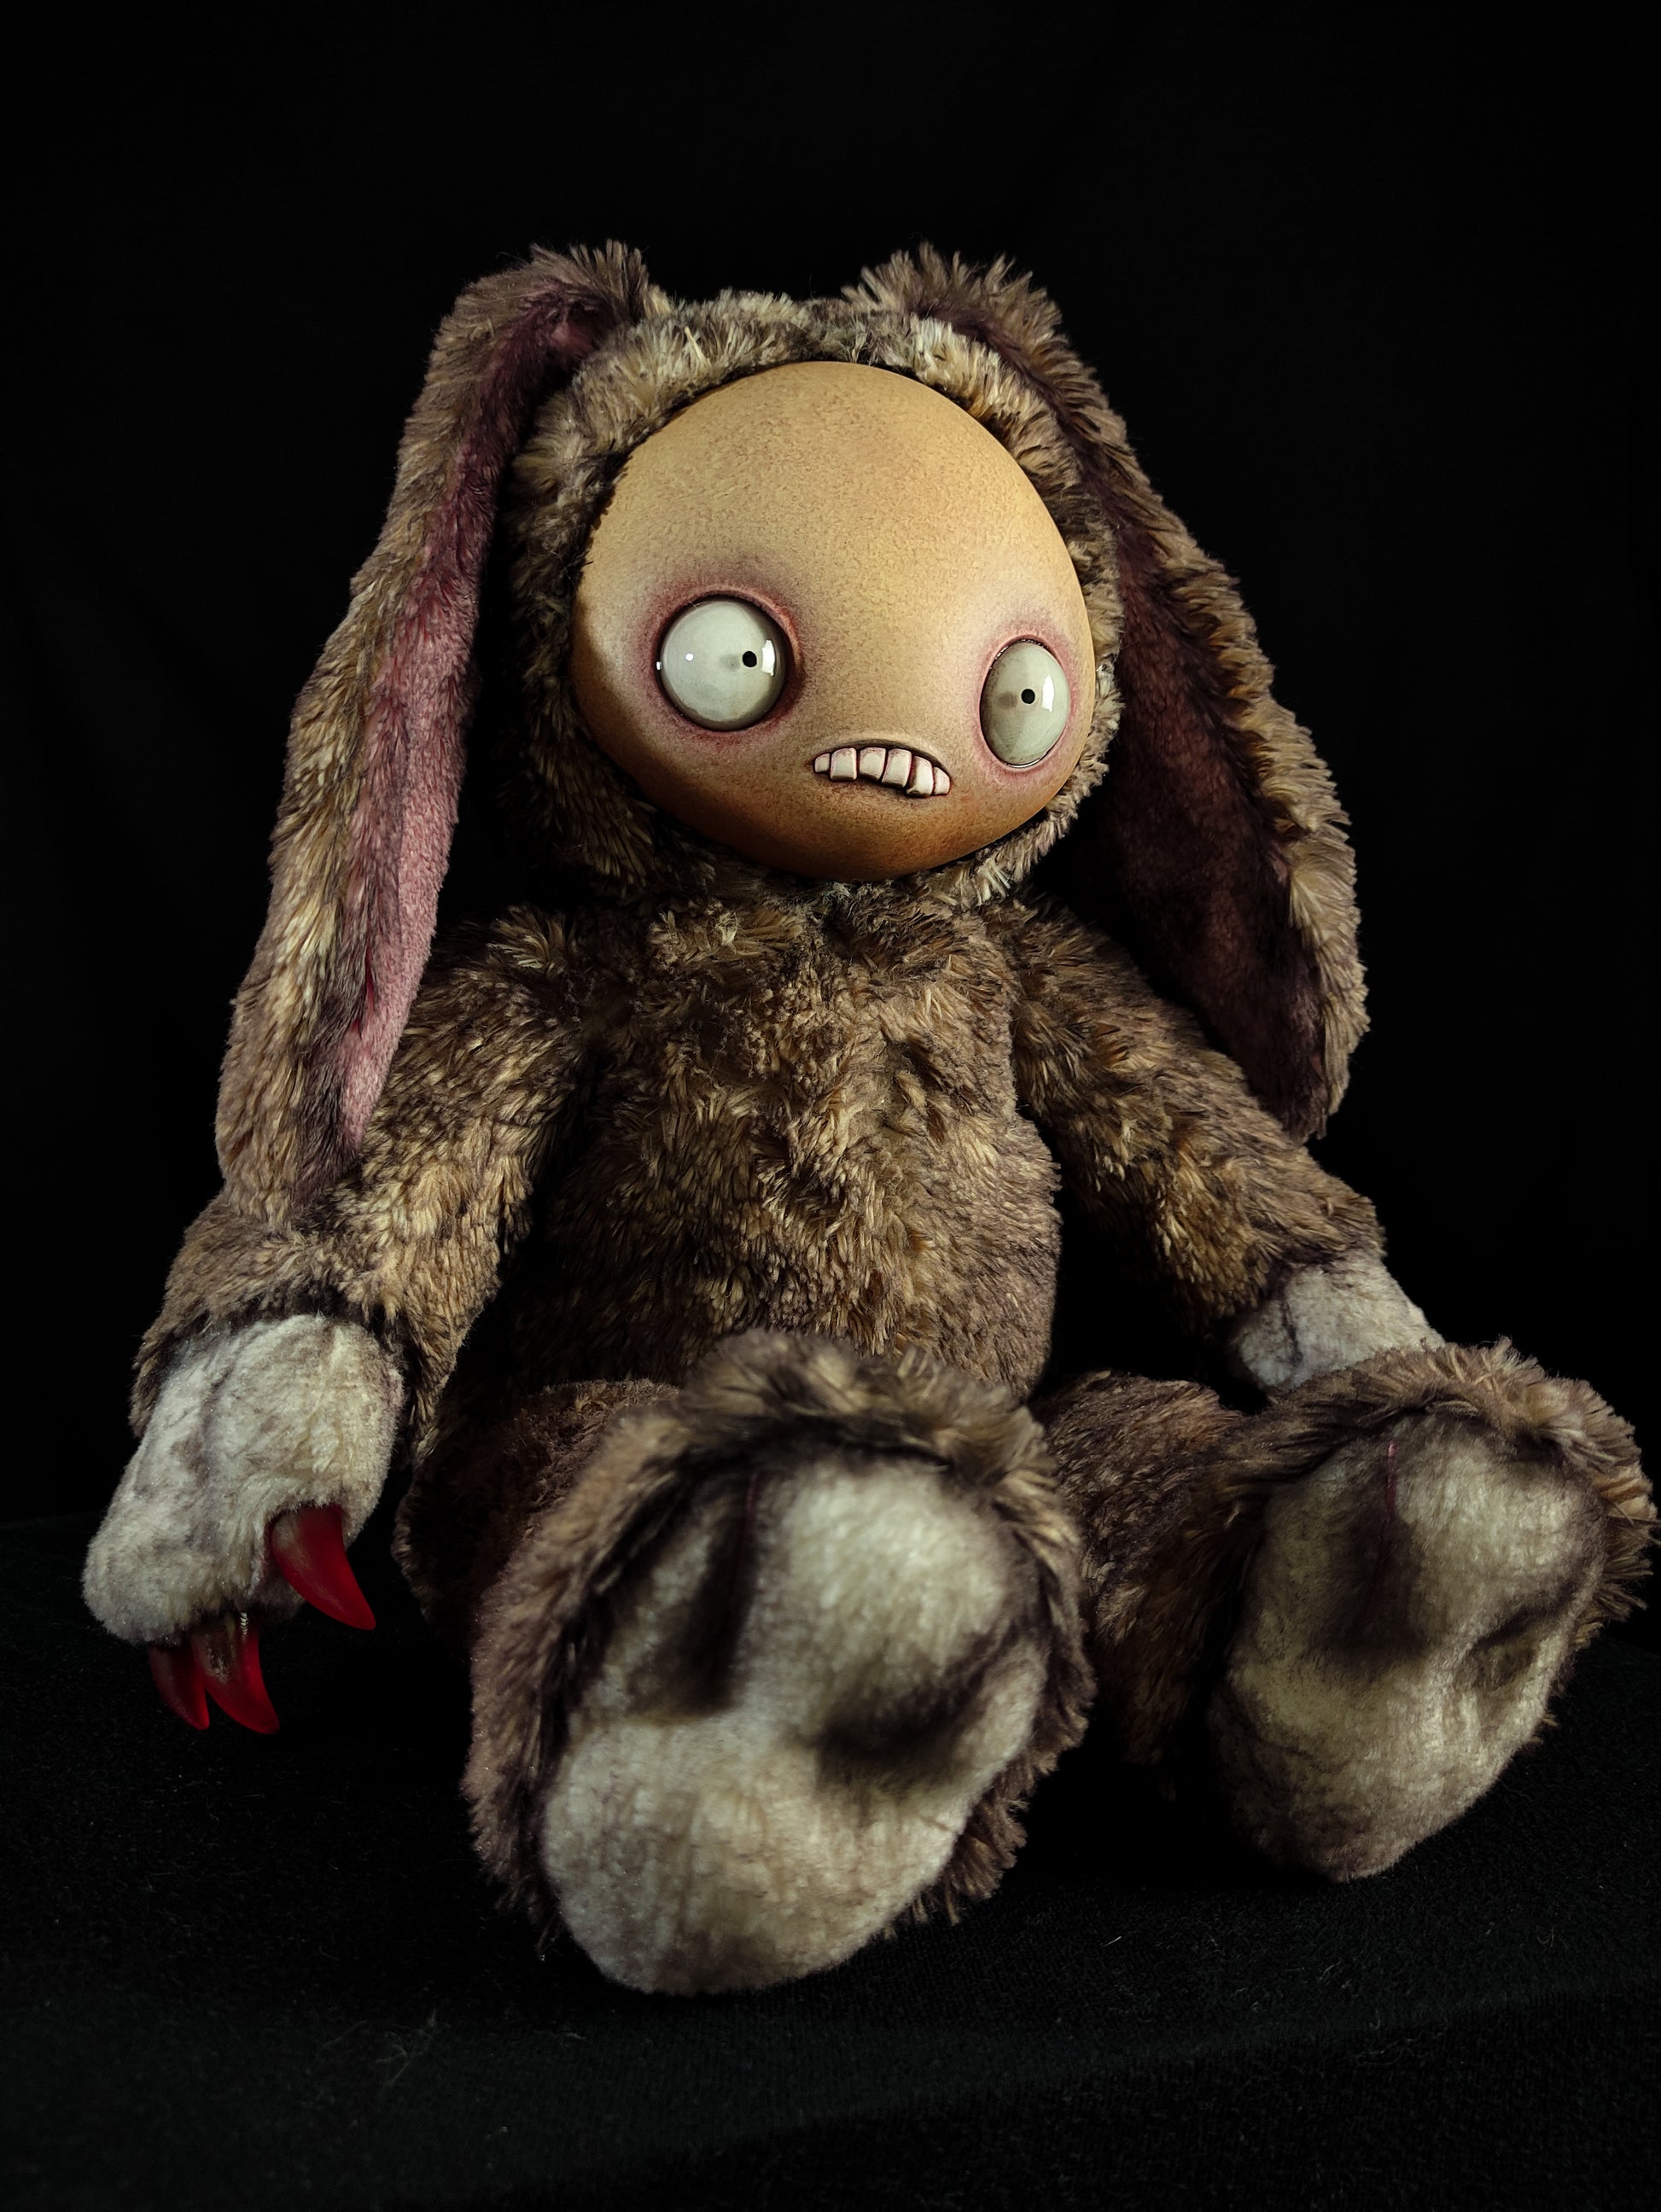 Jitters (Rickety Rottity Ver.) - Monster Art Doll Plush Toy